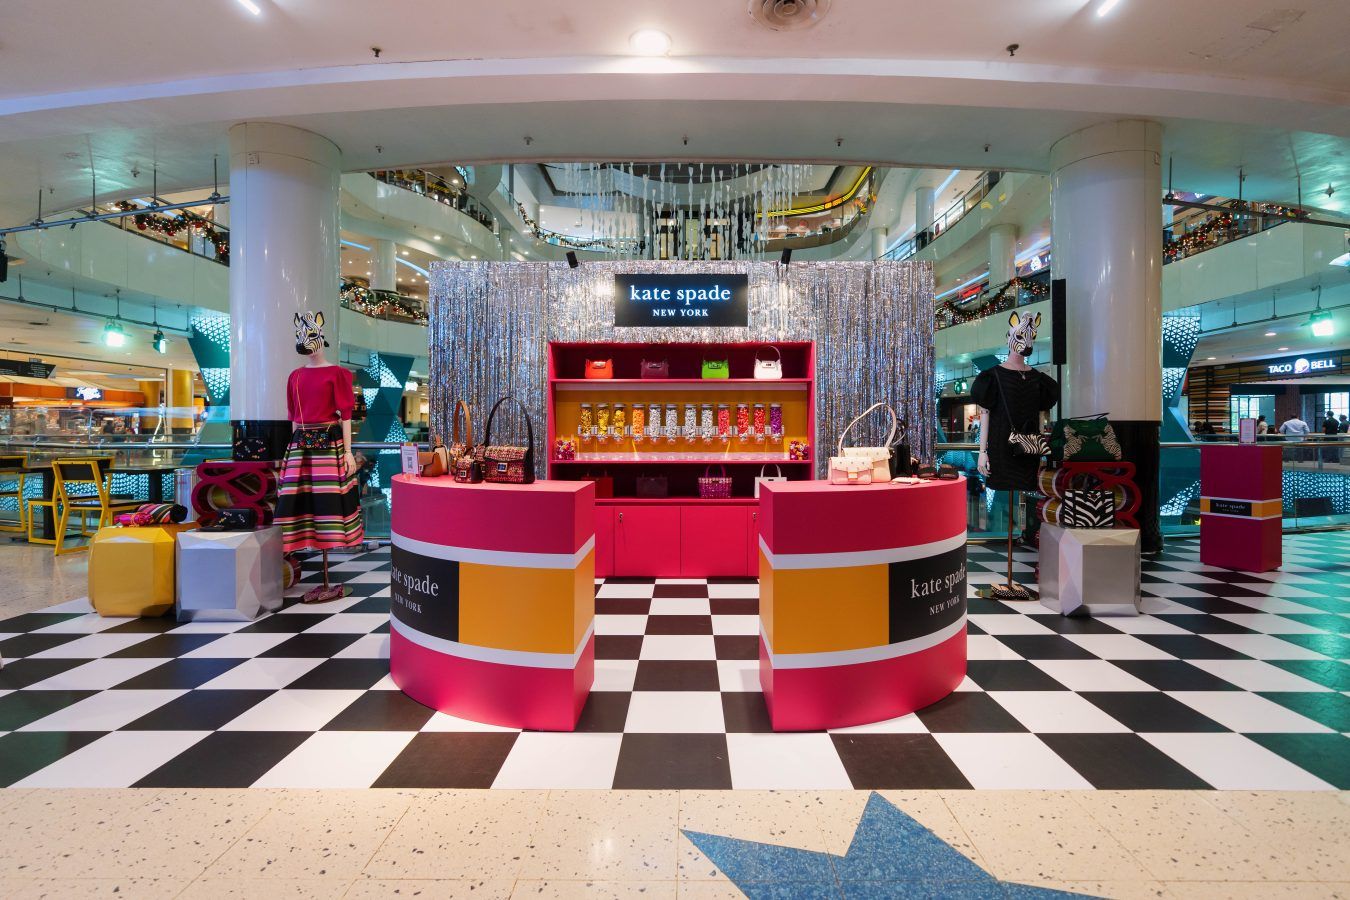 Kate Spade turns up this festive season with candy bar-inspired pop-up